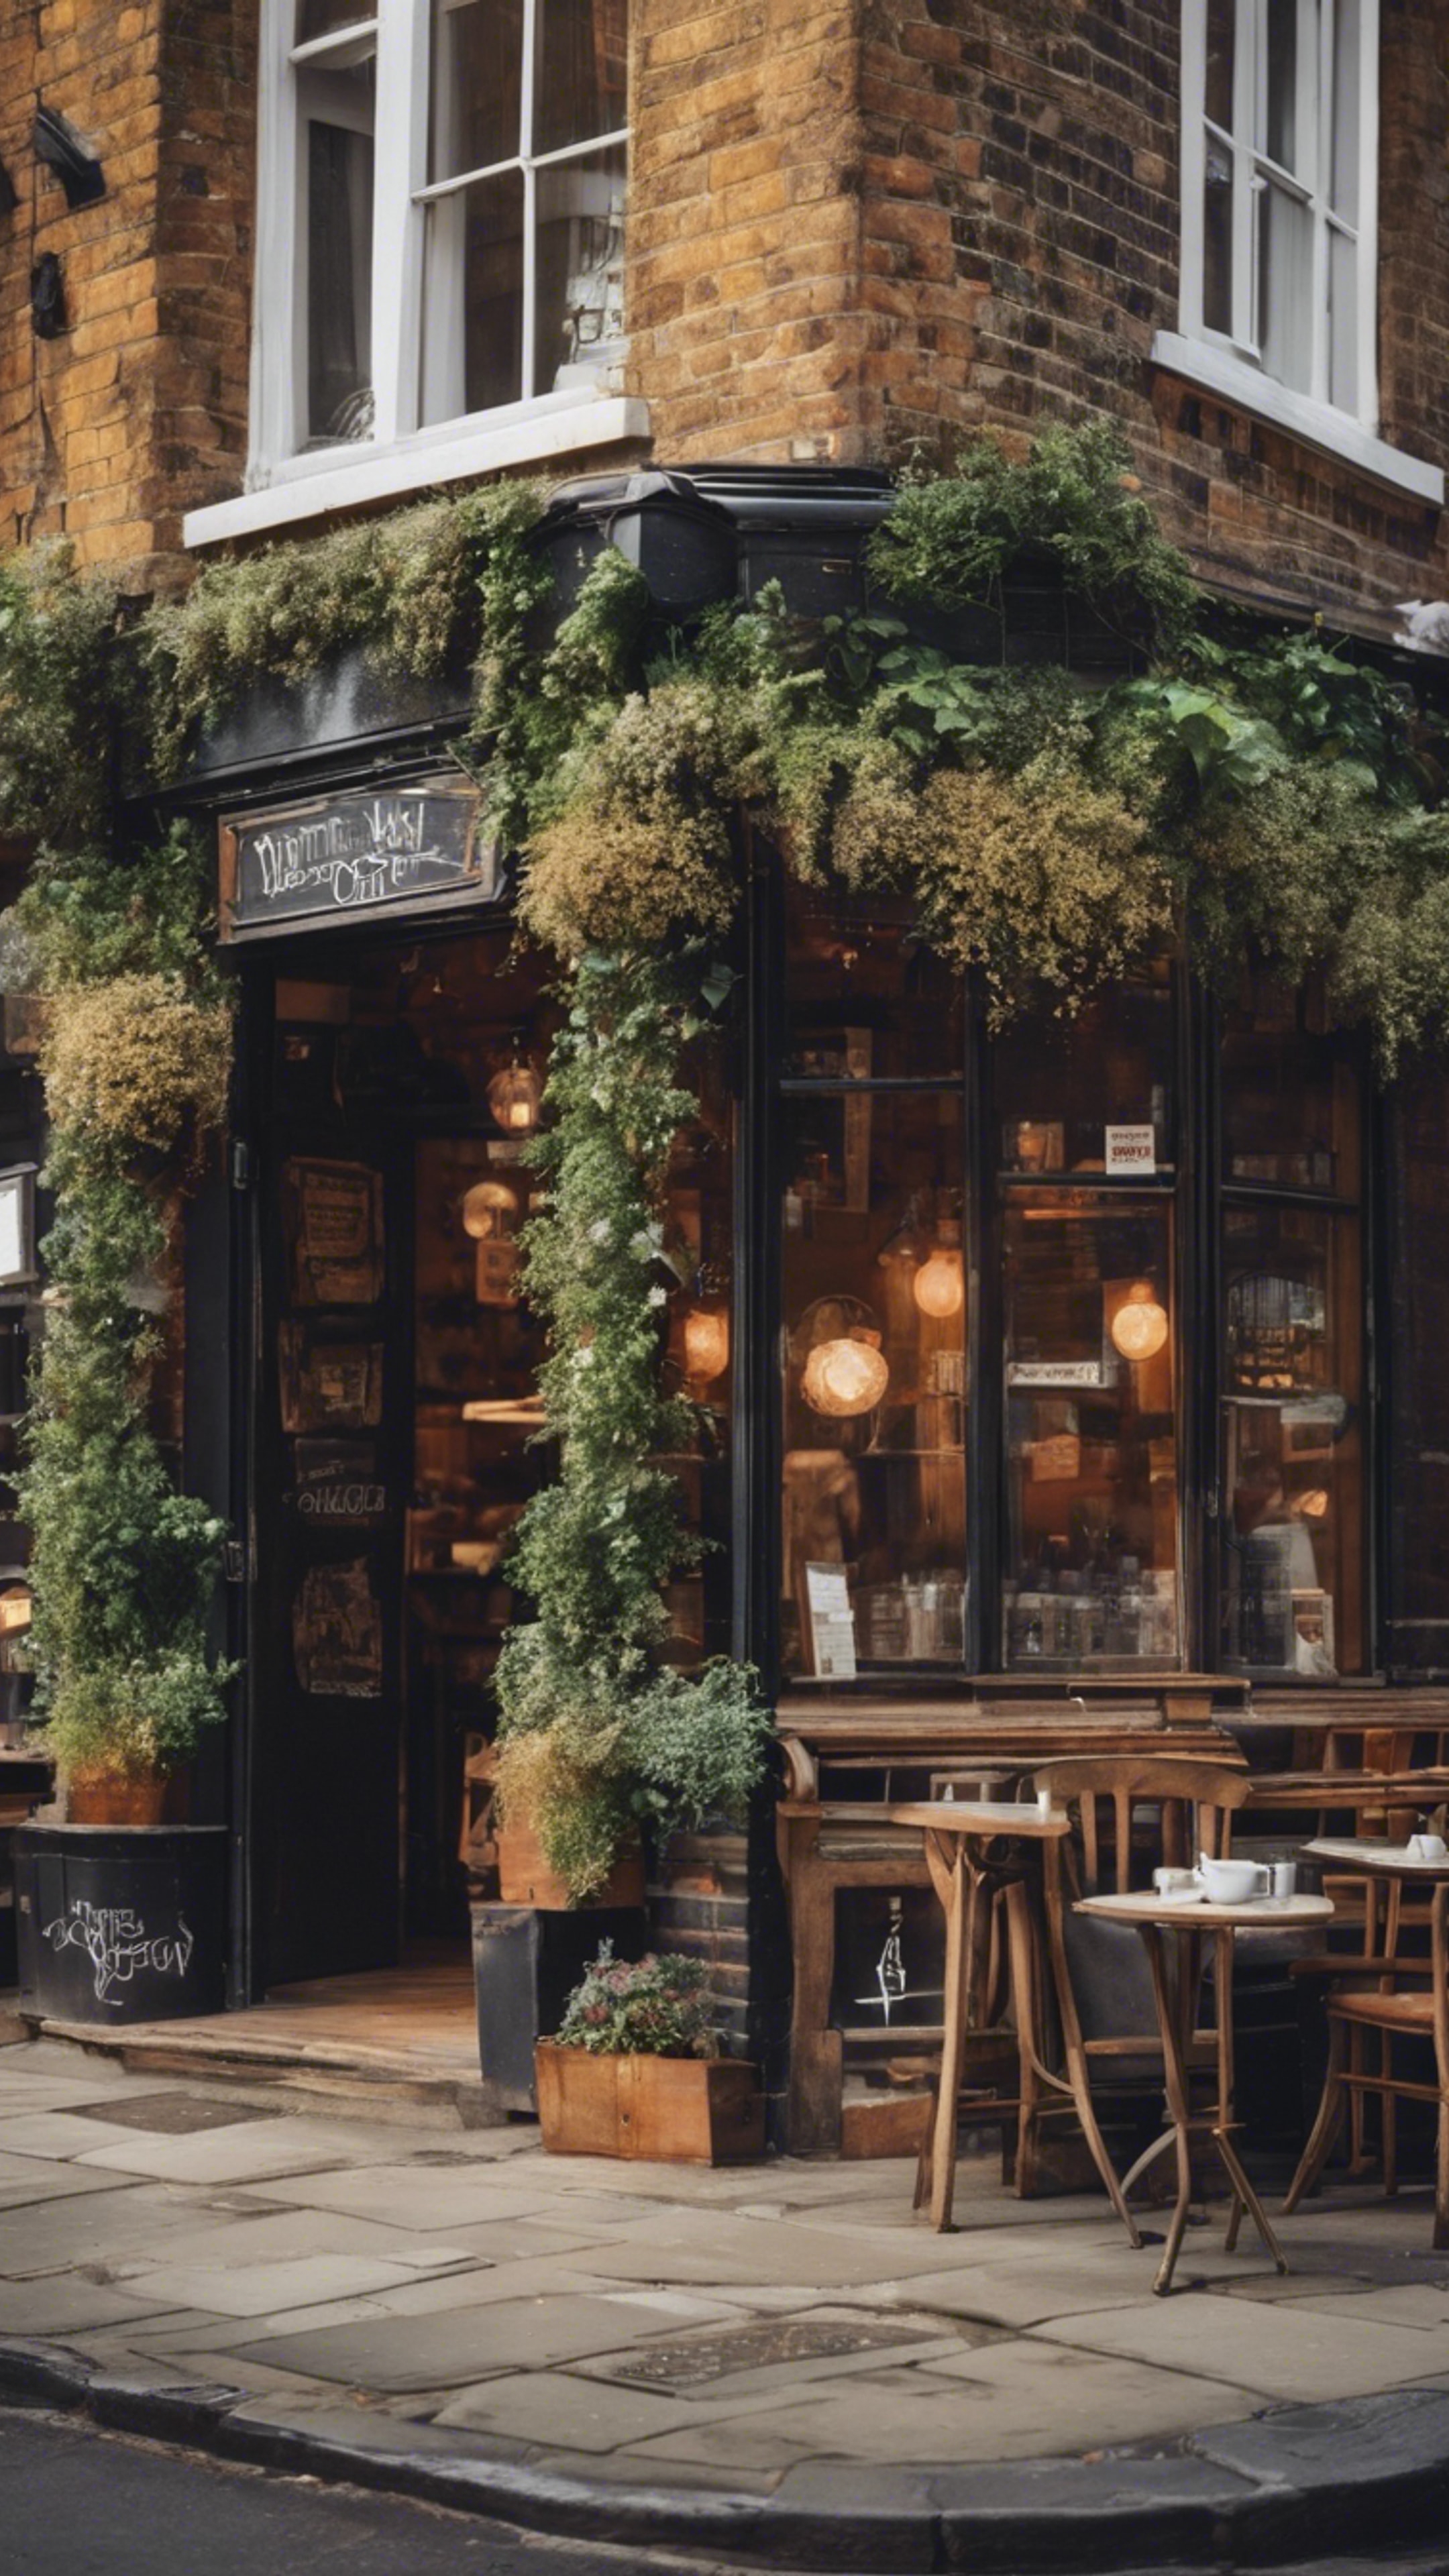 A rustic, quaint little cafe in the heart of London. Wallpaper[88734f965efa416ca947]